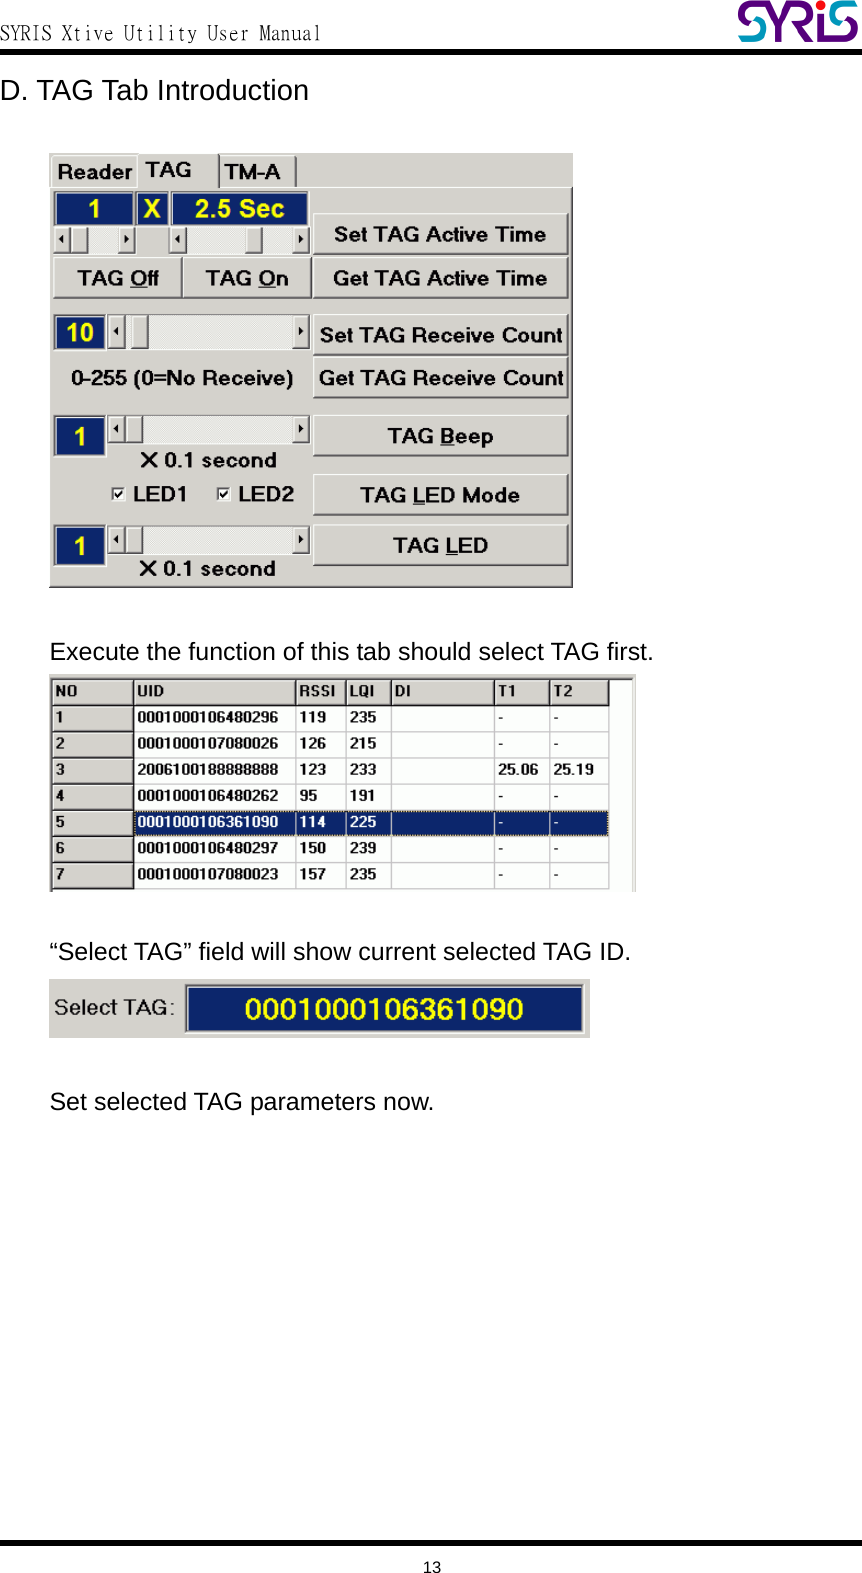  SYRIS Xtive Utility User Manual  D. TAG Tab Introduction    Execute the function of this tab should select TAG first.   “Select TAG” field will show current selected TAG ID.   Set selected TAG parameters now.   13 